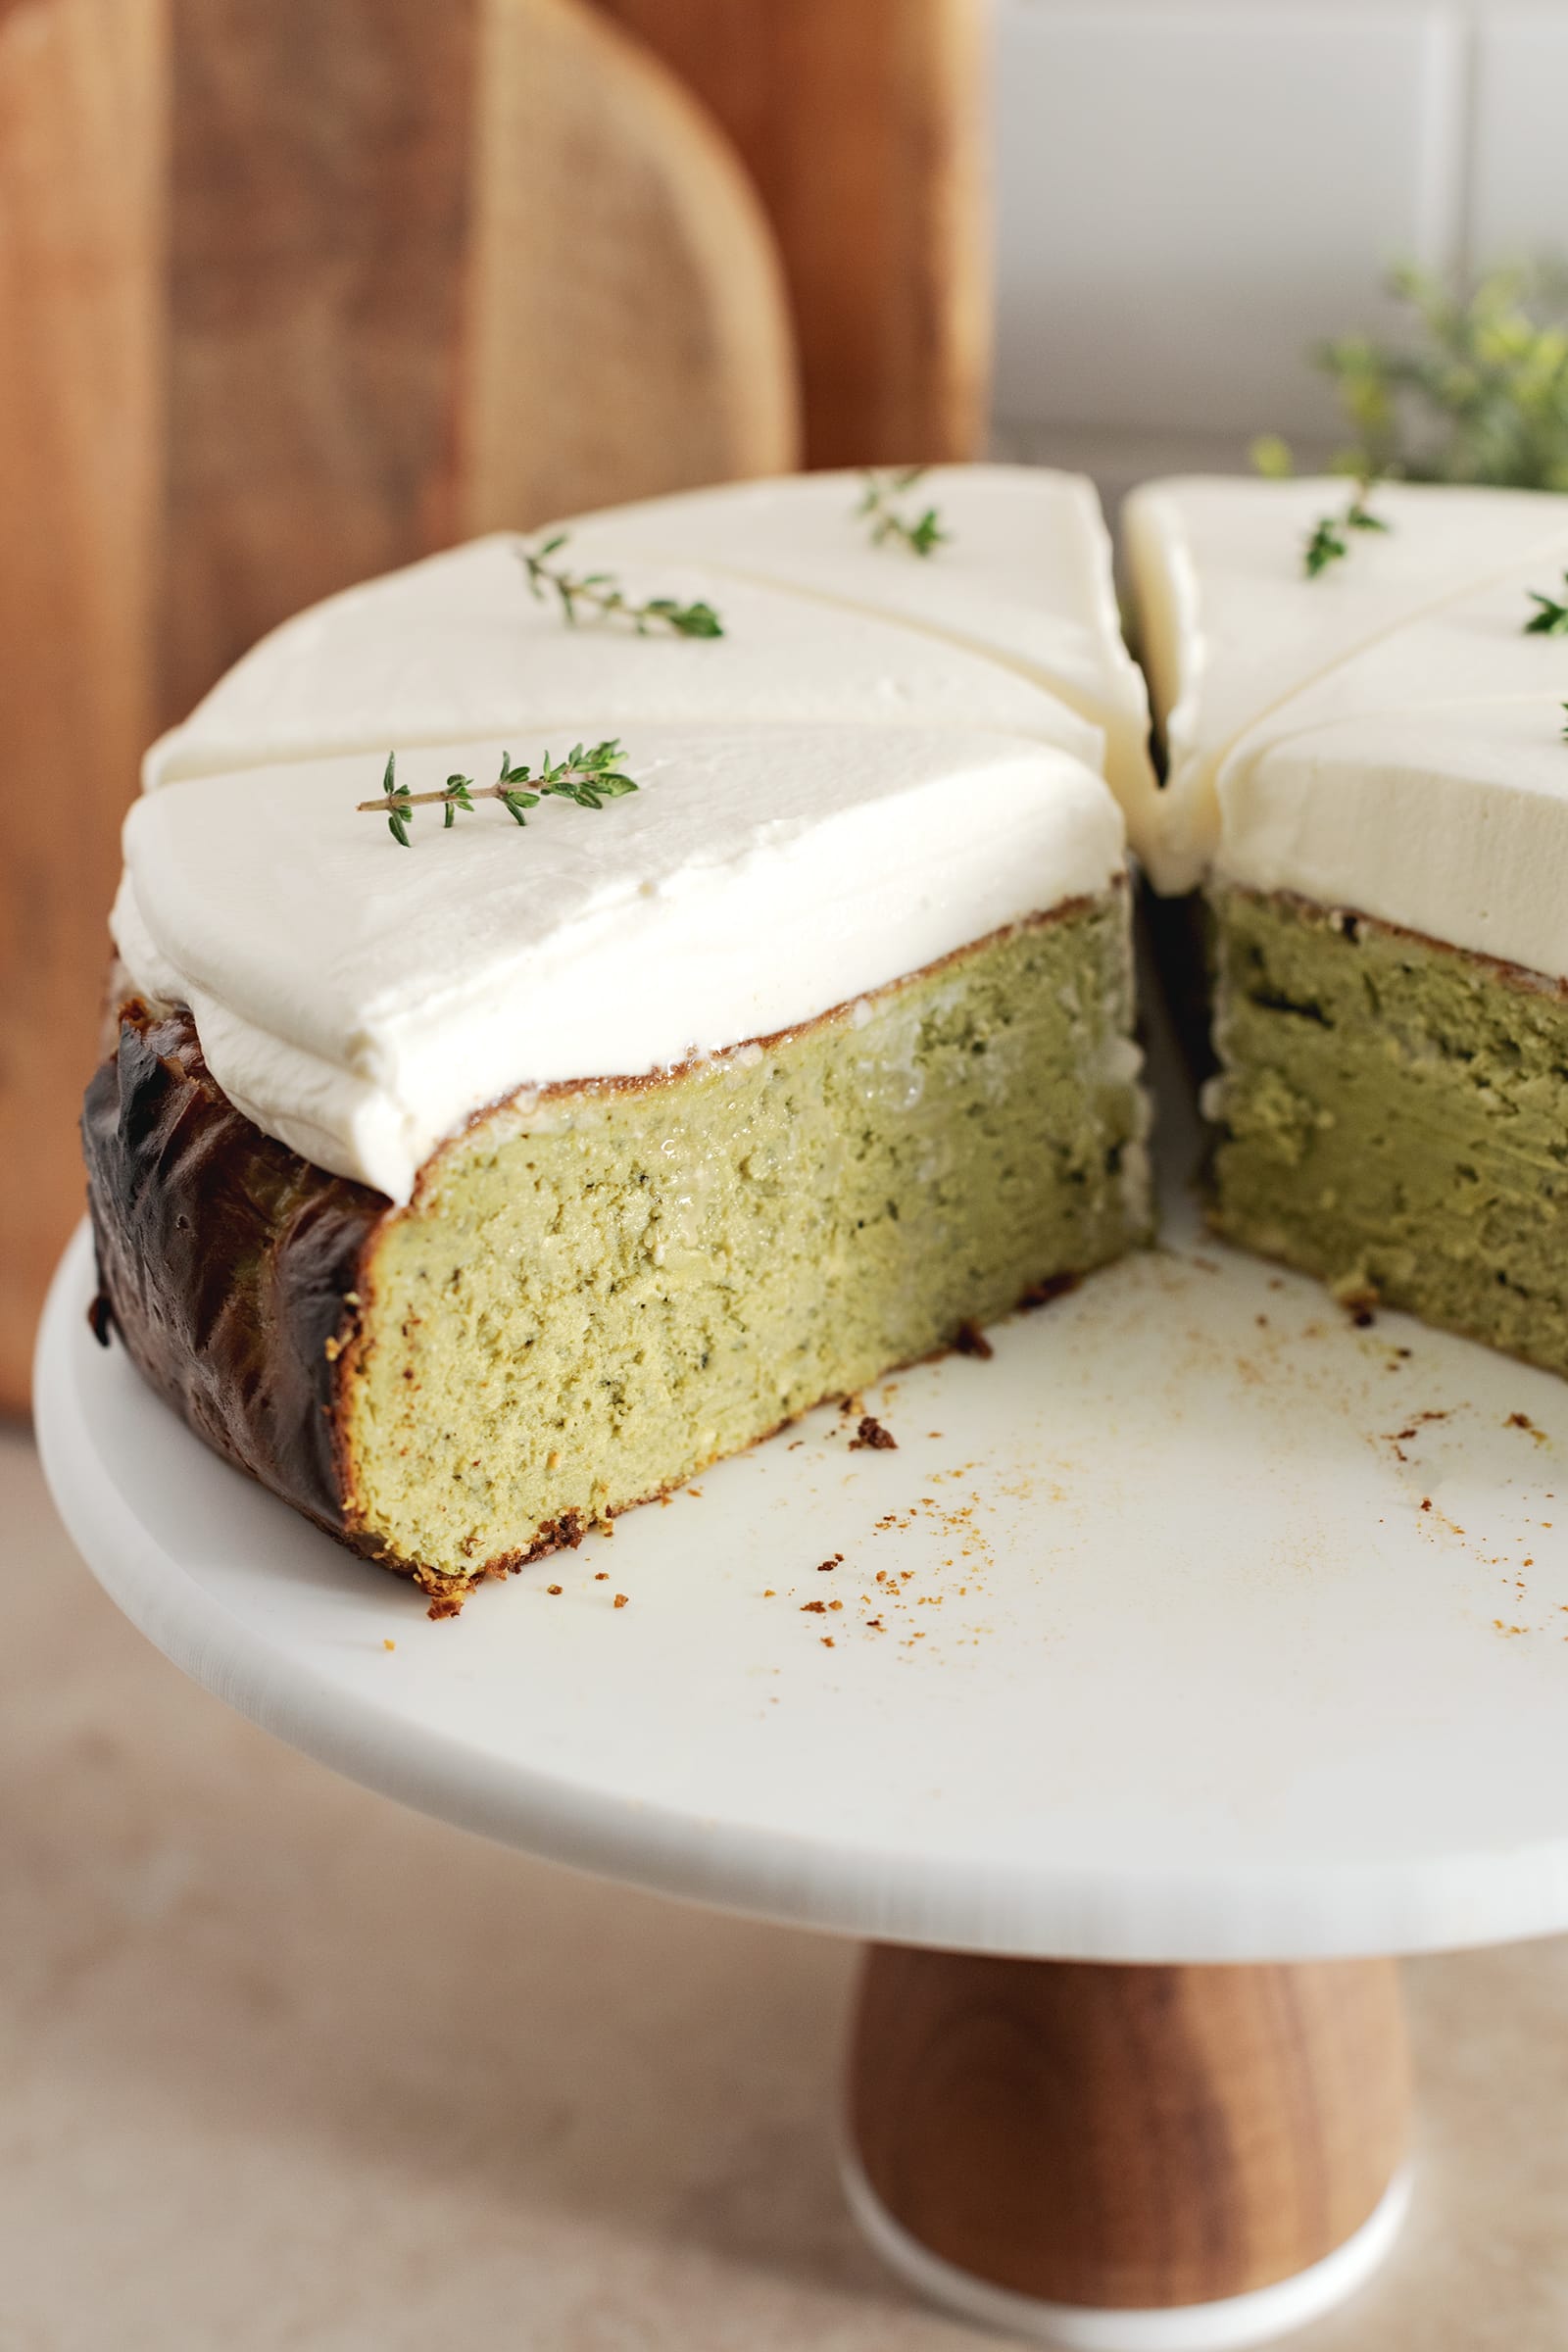 Cross section of a cheesecake with matcha and whipped cream layers.